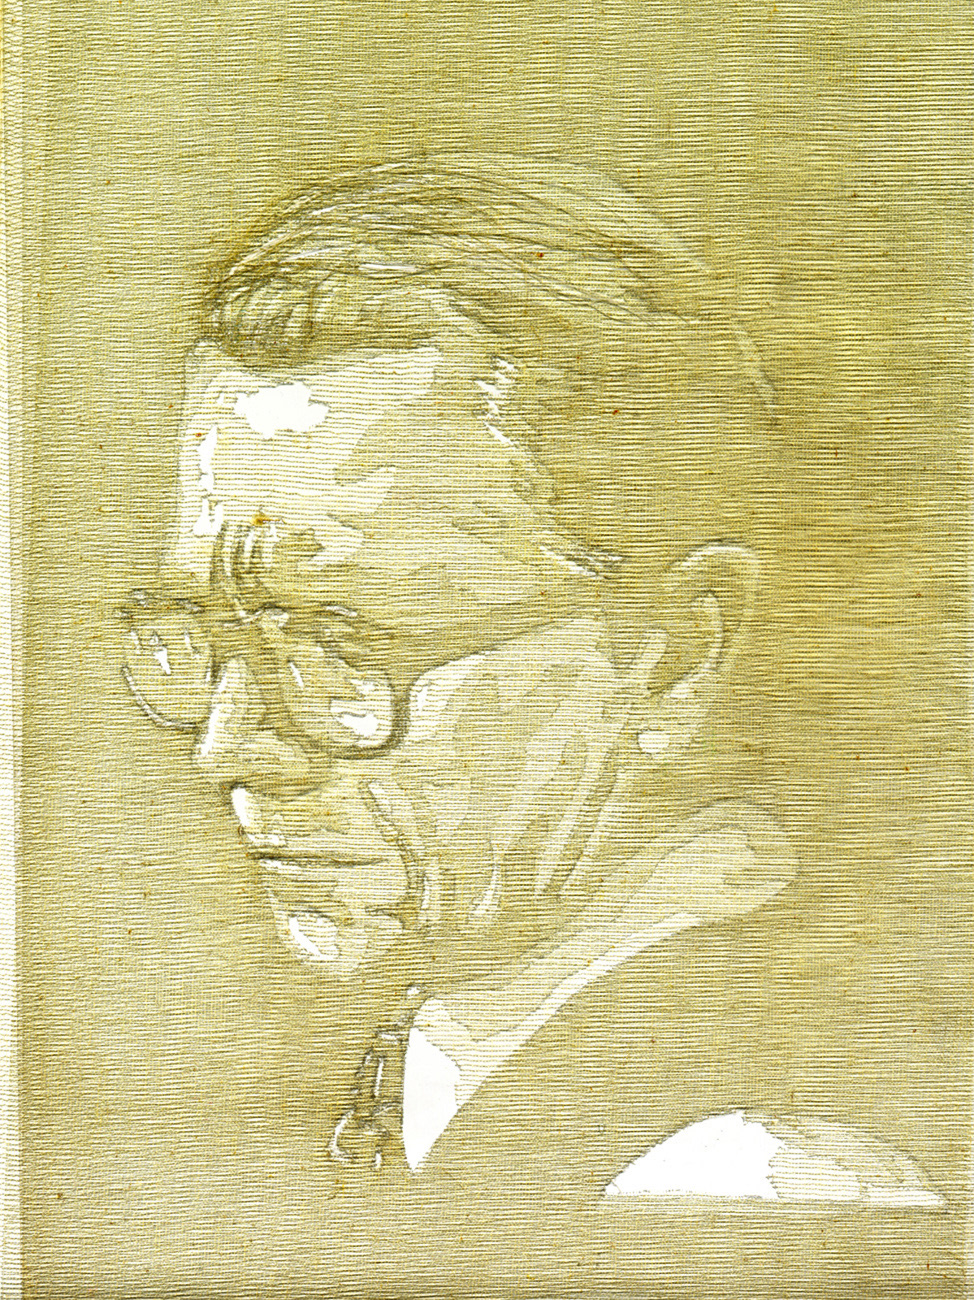 layered fabric for screen printed portrait of gary oldman portrait from tinker tailor soldier spy